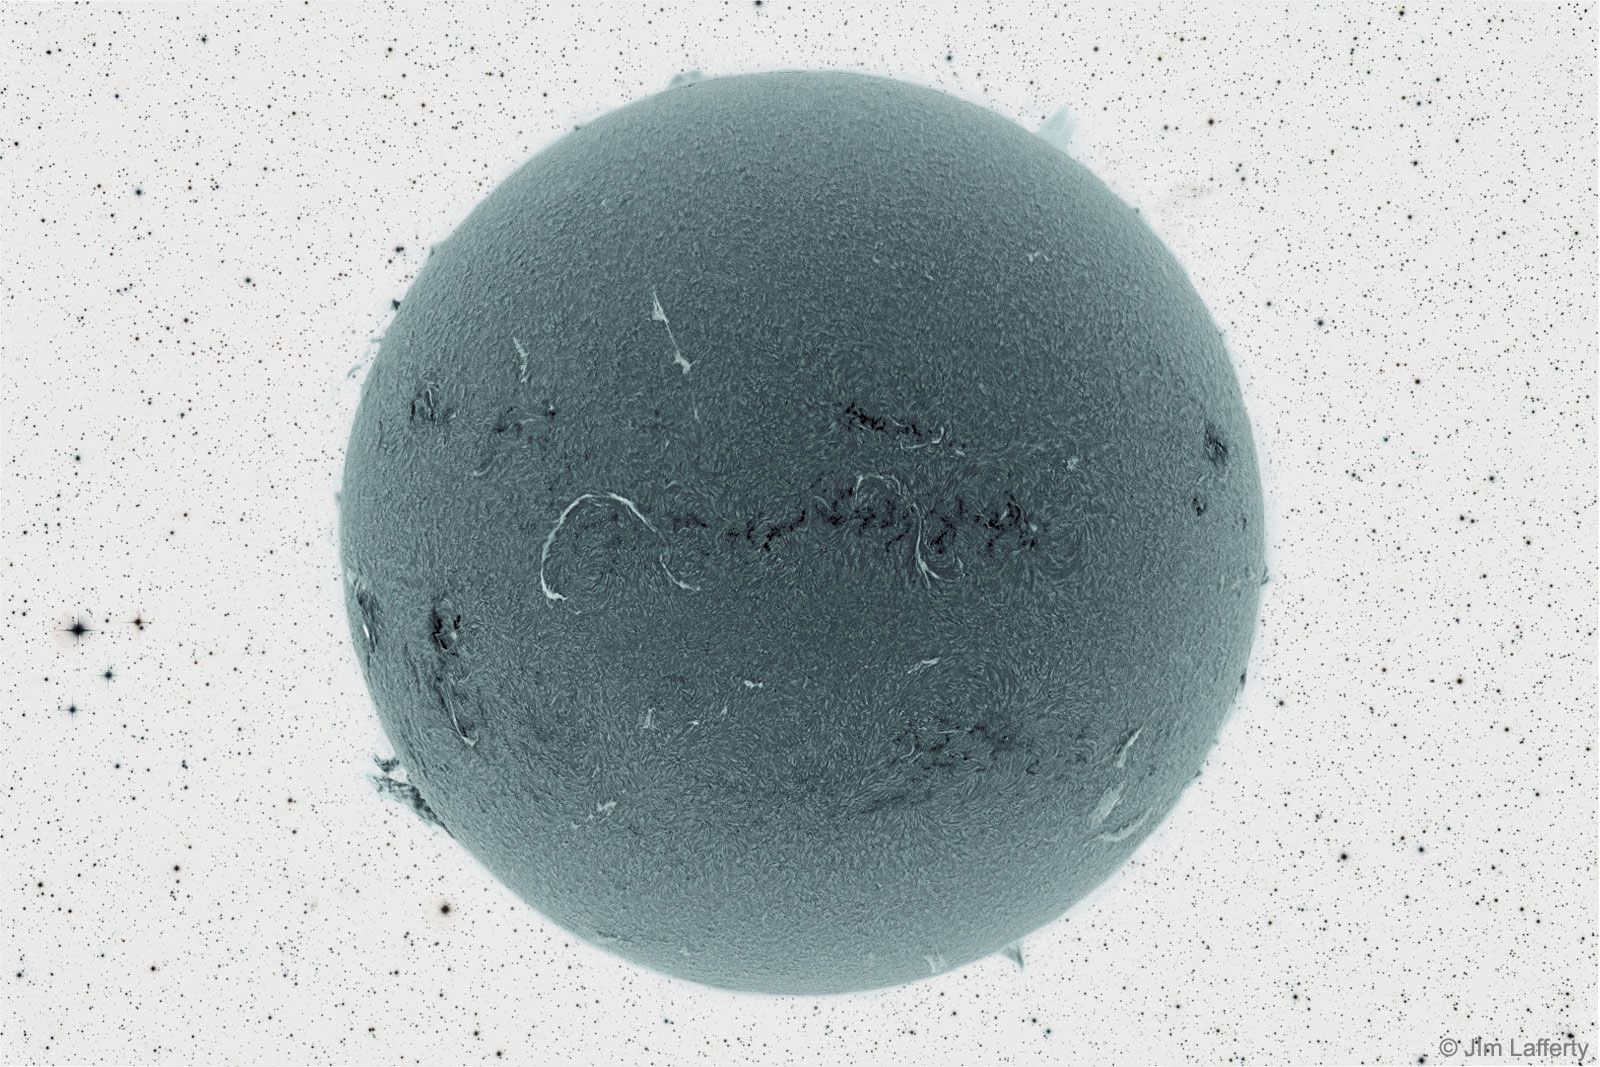  Black Sun and Inverted Starfield 